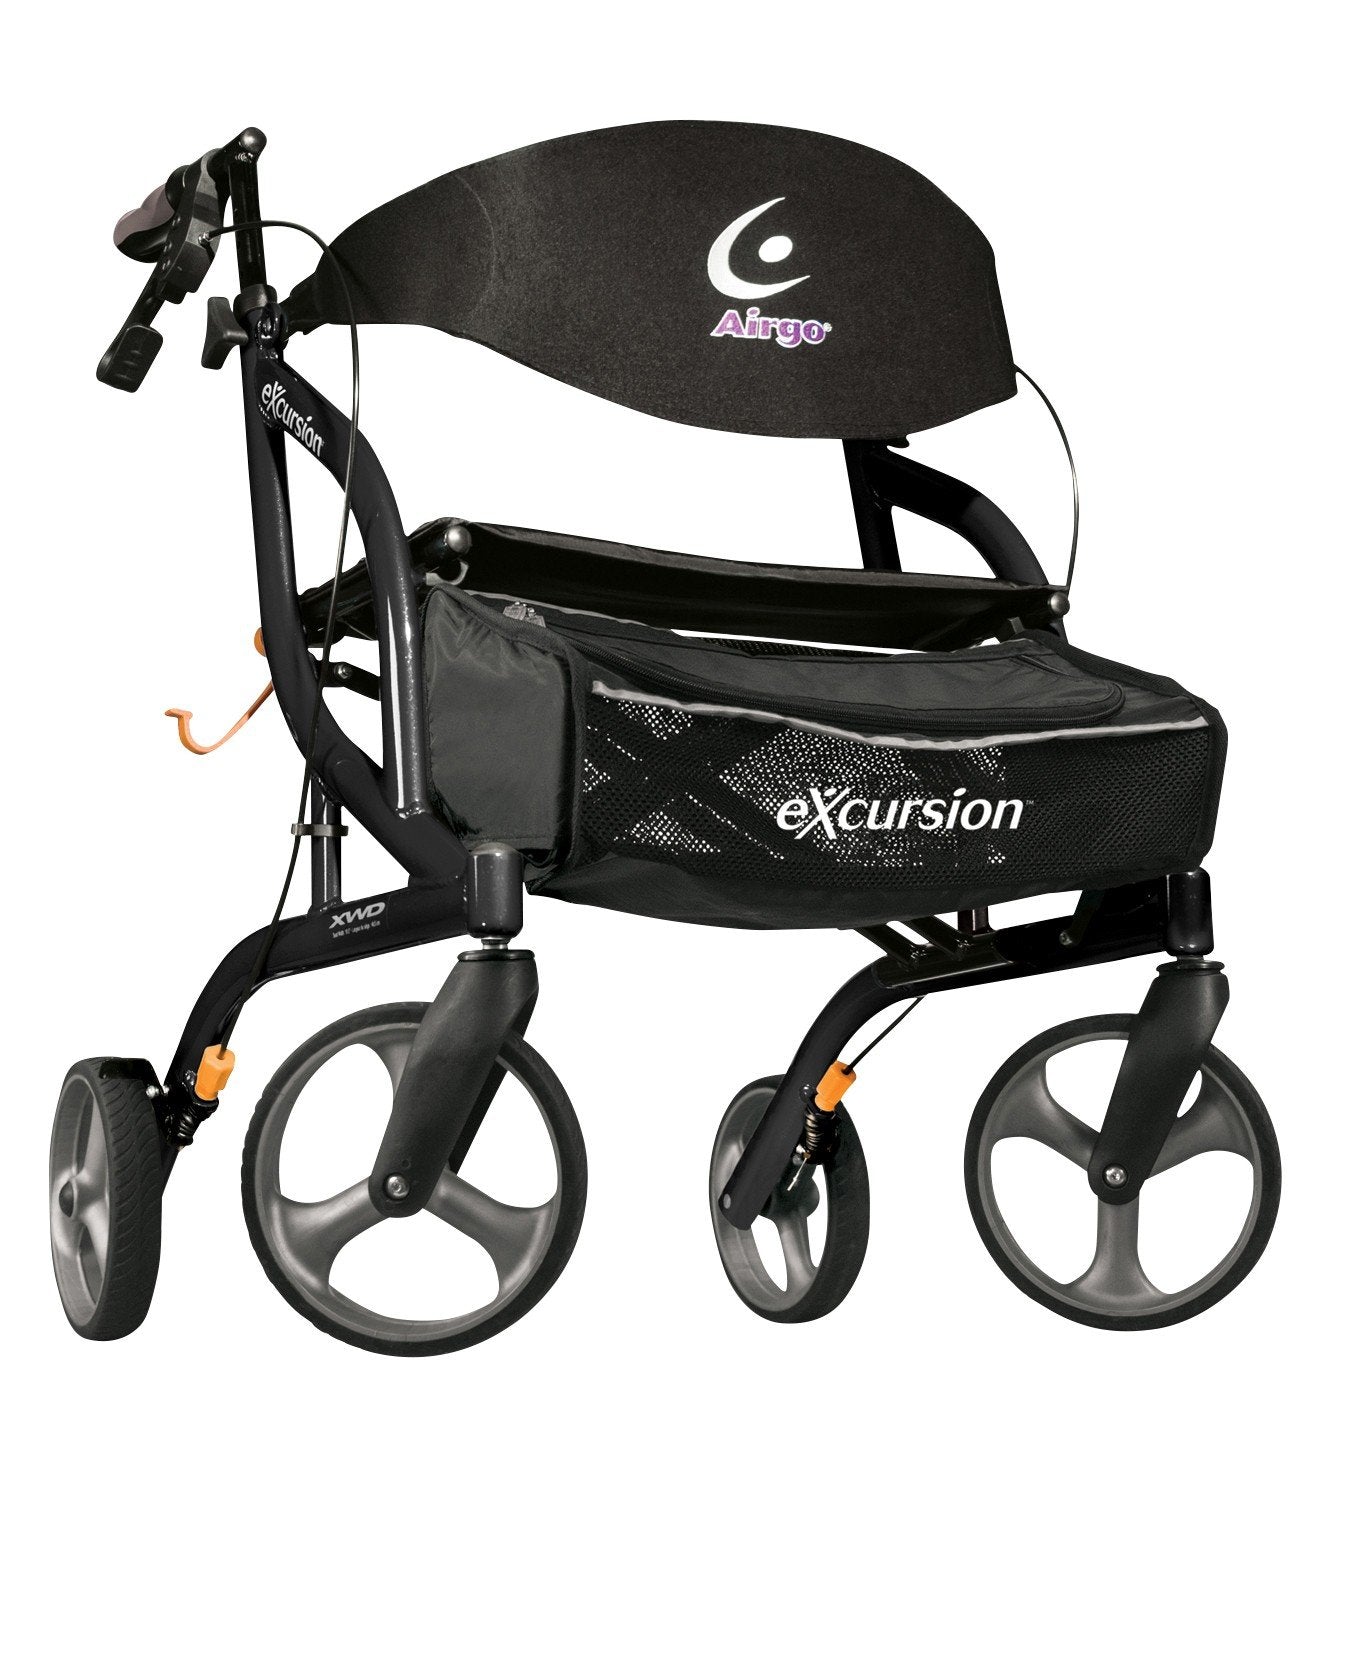 AMG 700-929 EA/1 AIRGO EXCURSION, EXTRA WIDE, SIDE FOLD ROLLATOR, PEARL BLACK.